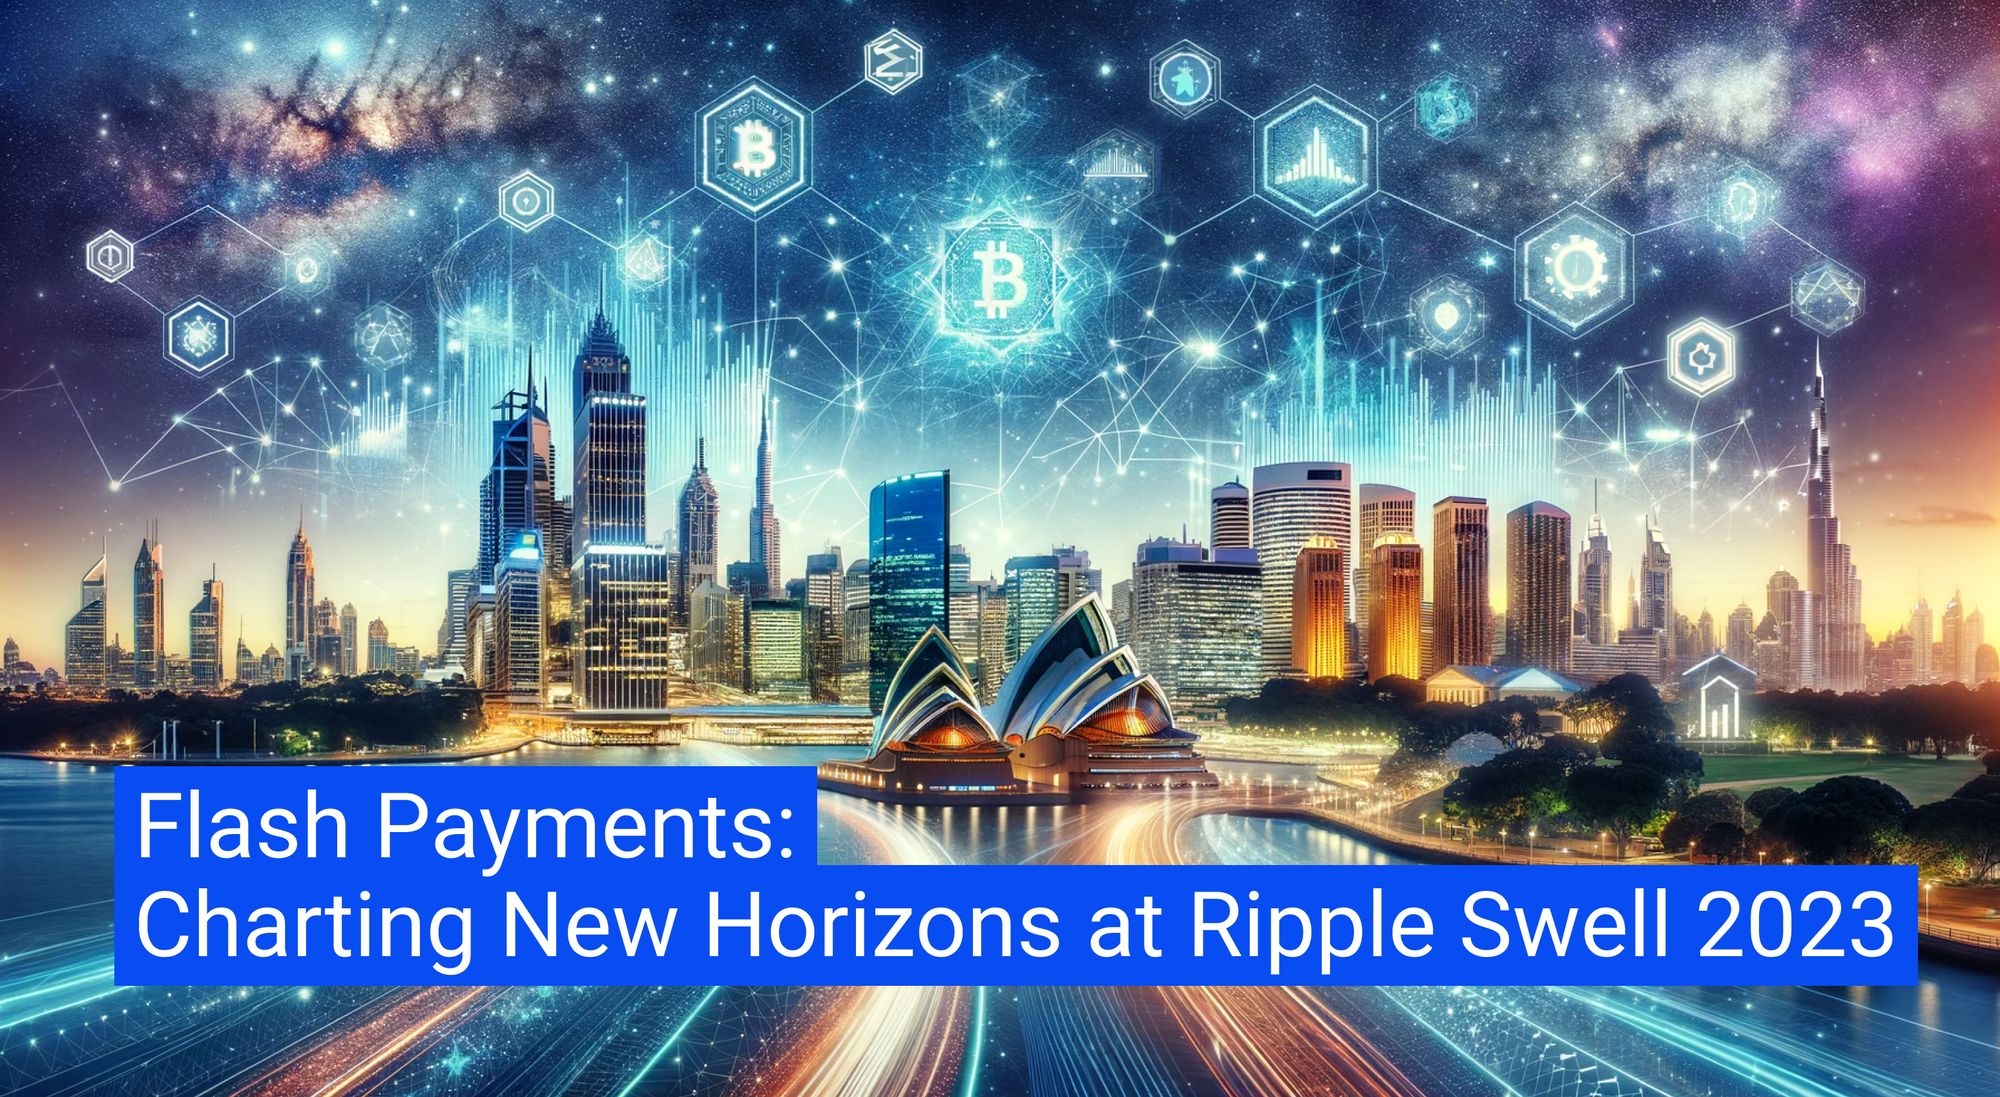 Flash Payments: Charting New Horizons at Ripple Swell 2023